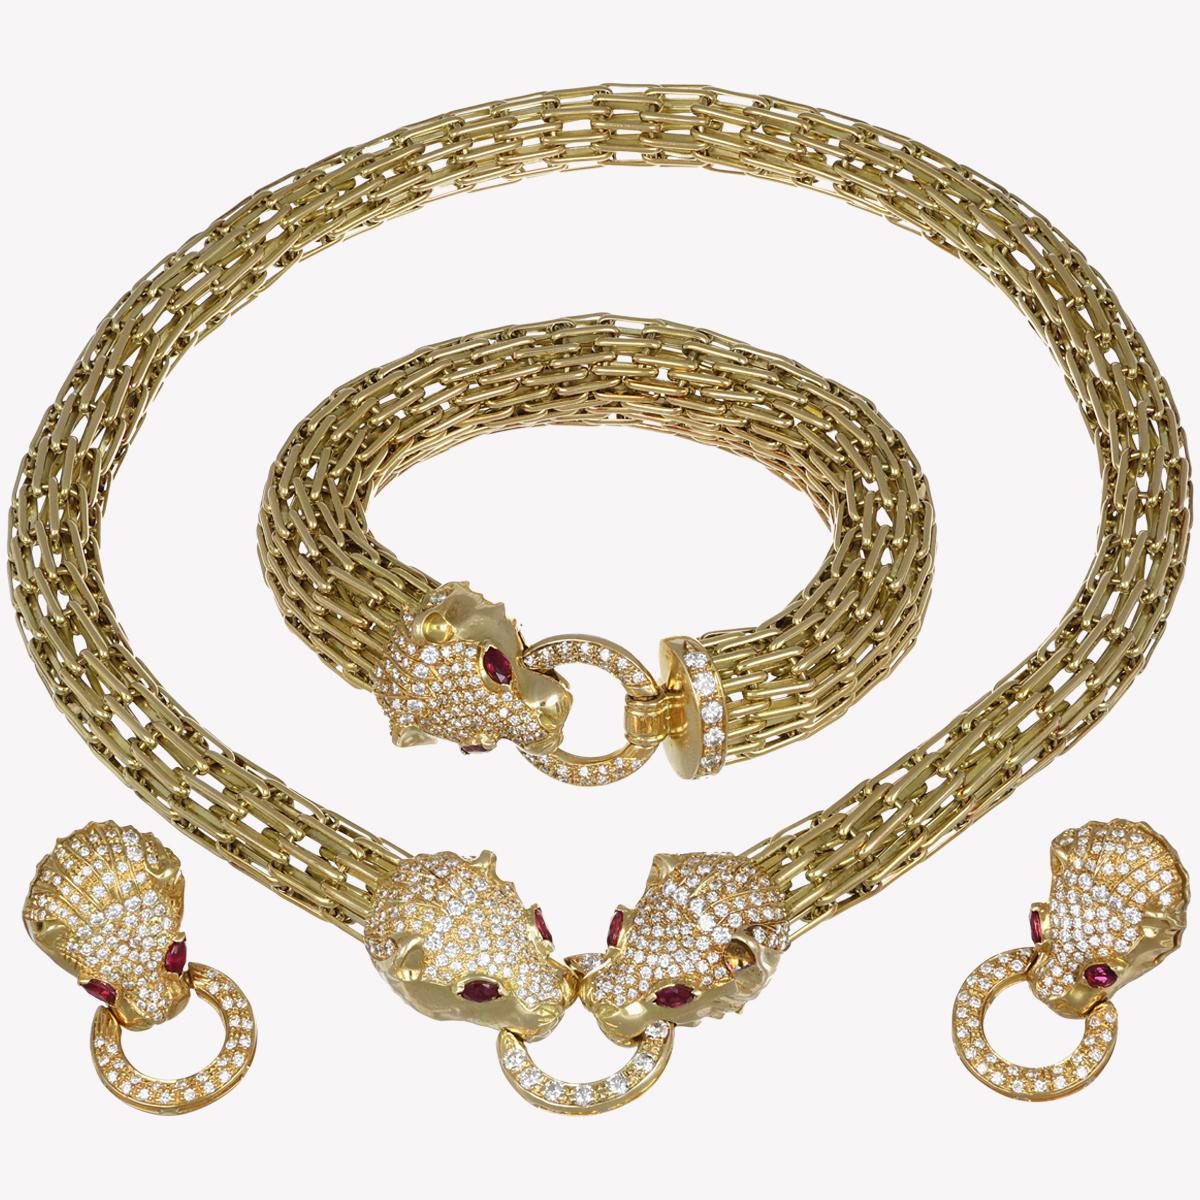 Resplendent symbol of power and prestige, this panther-shaped parure in 18kt yellow gold is a triumph of jewelry craftsmanship. The panther heads, with 